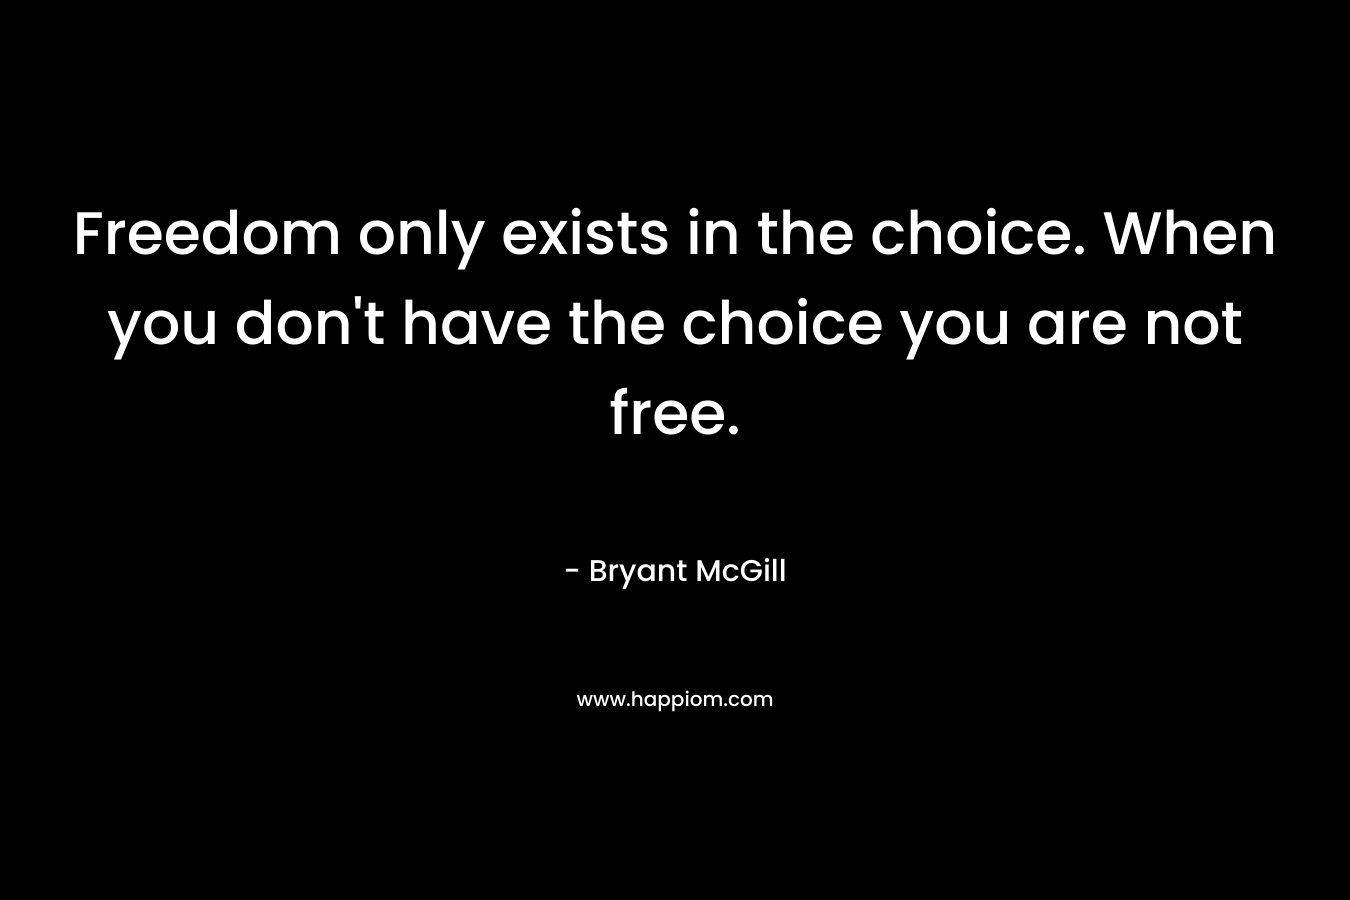 Freedom only exists in the choice. When you don't have the choice you are not free.